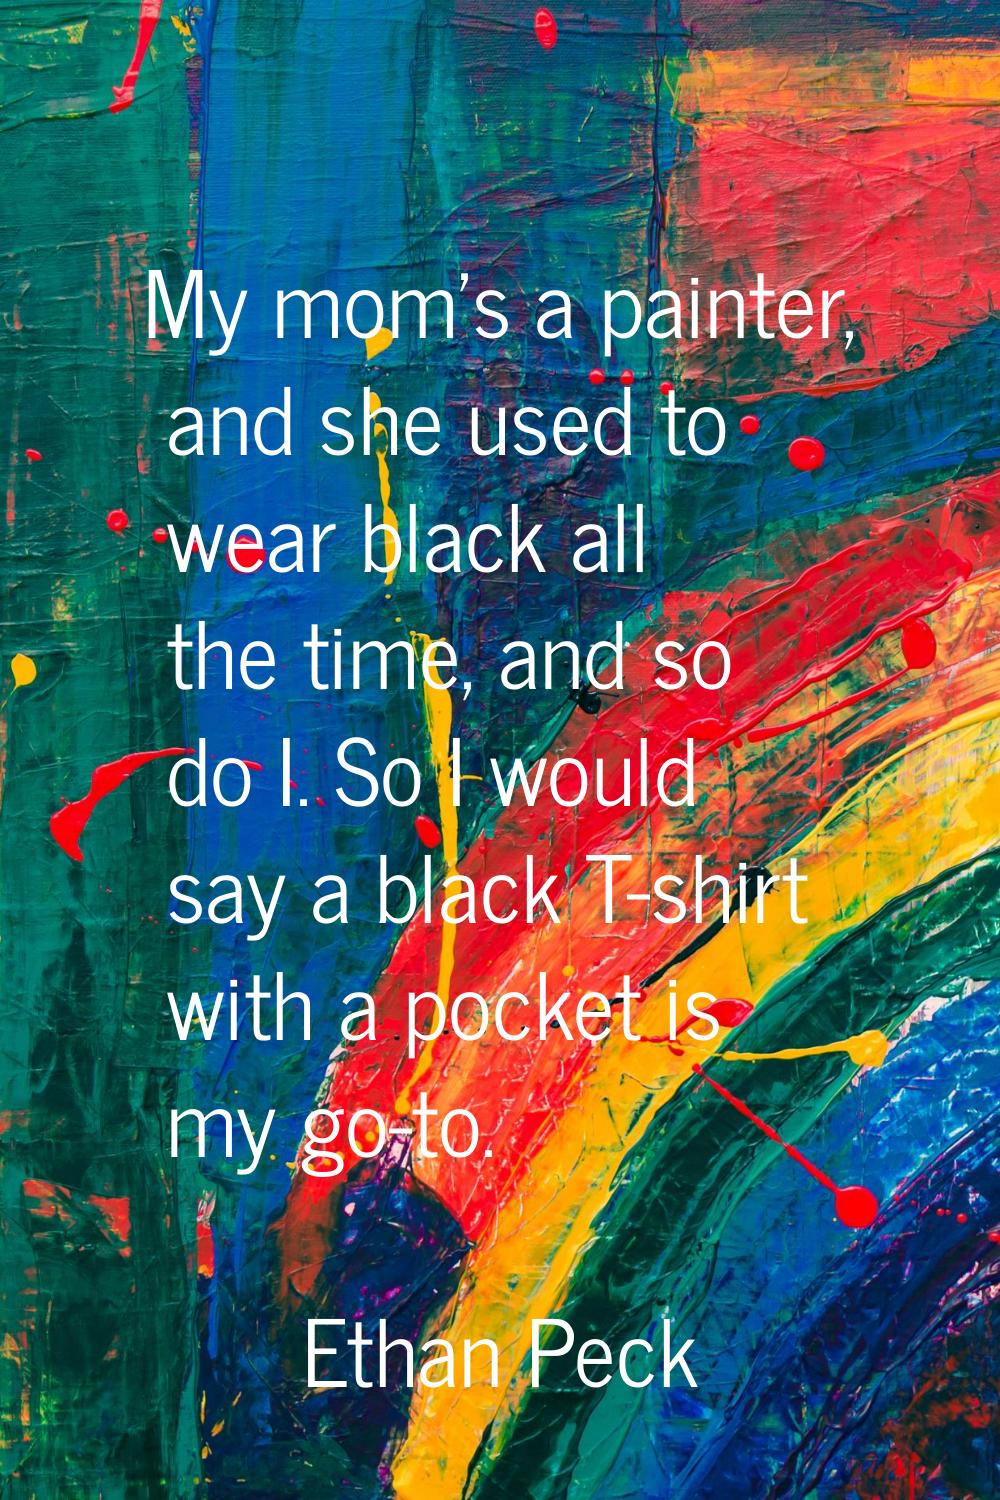 My mom's a painter, and she used to wear black all the time, and so do I. So I would say a black T-